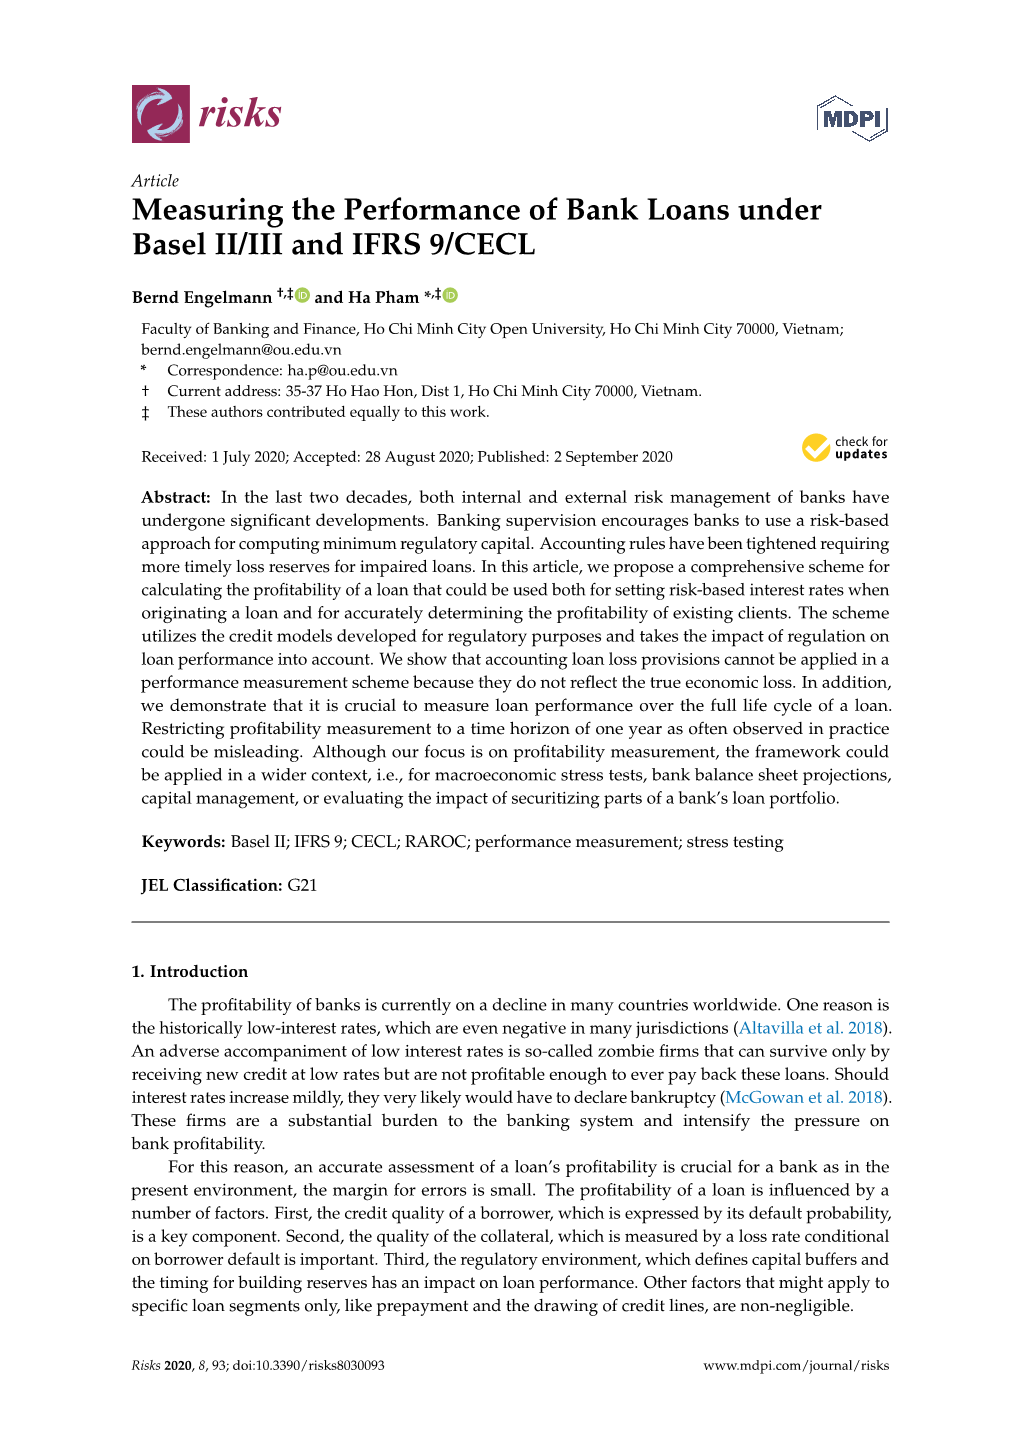 Measuring the Performance of Bank Loans Under Basel II/III and IFRS 9/CECL